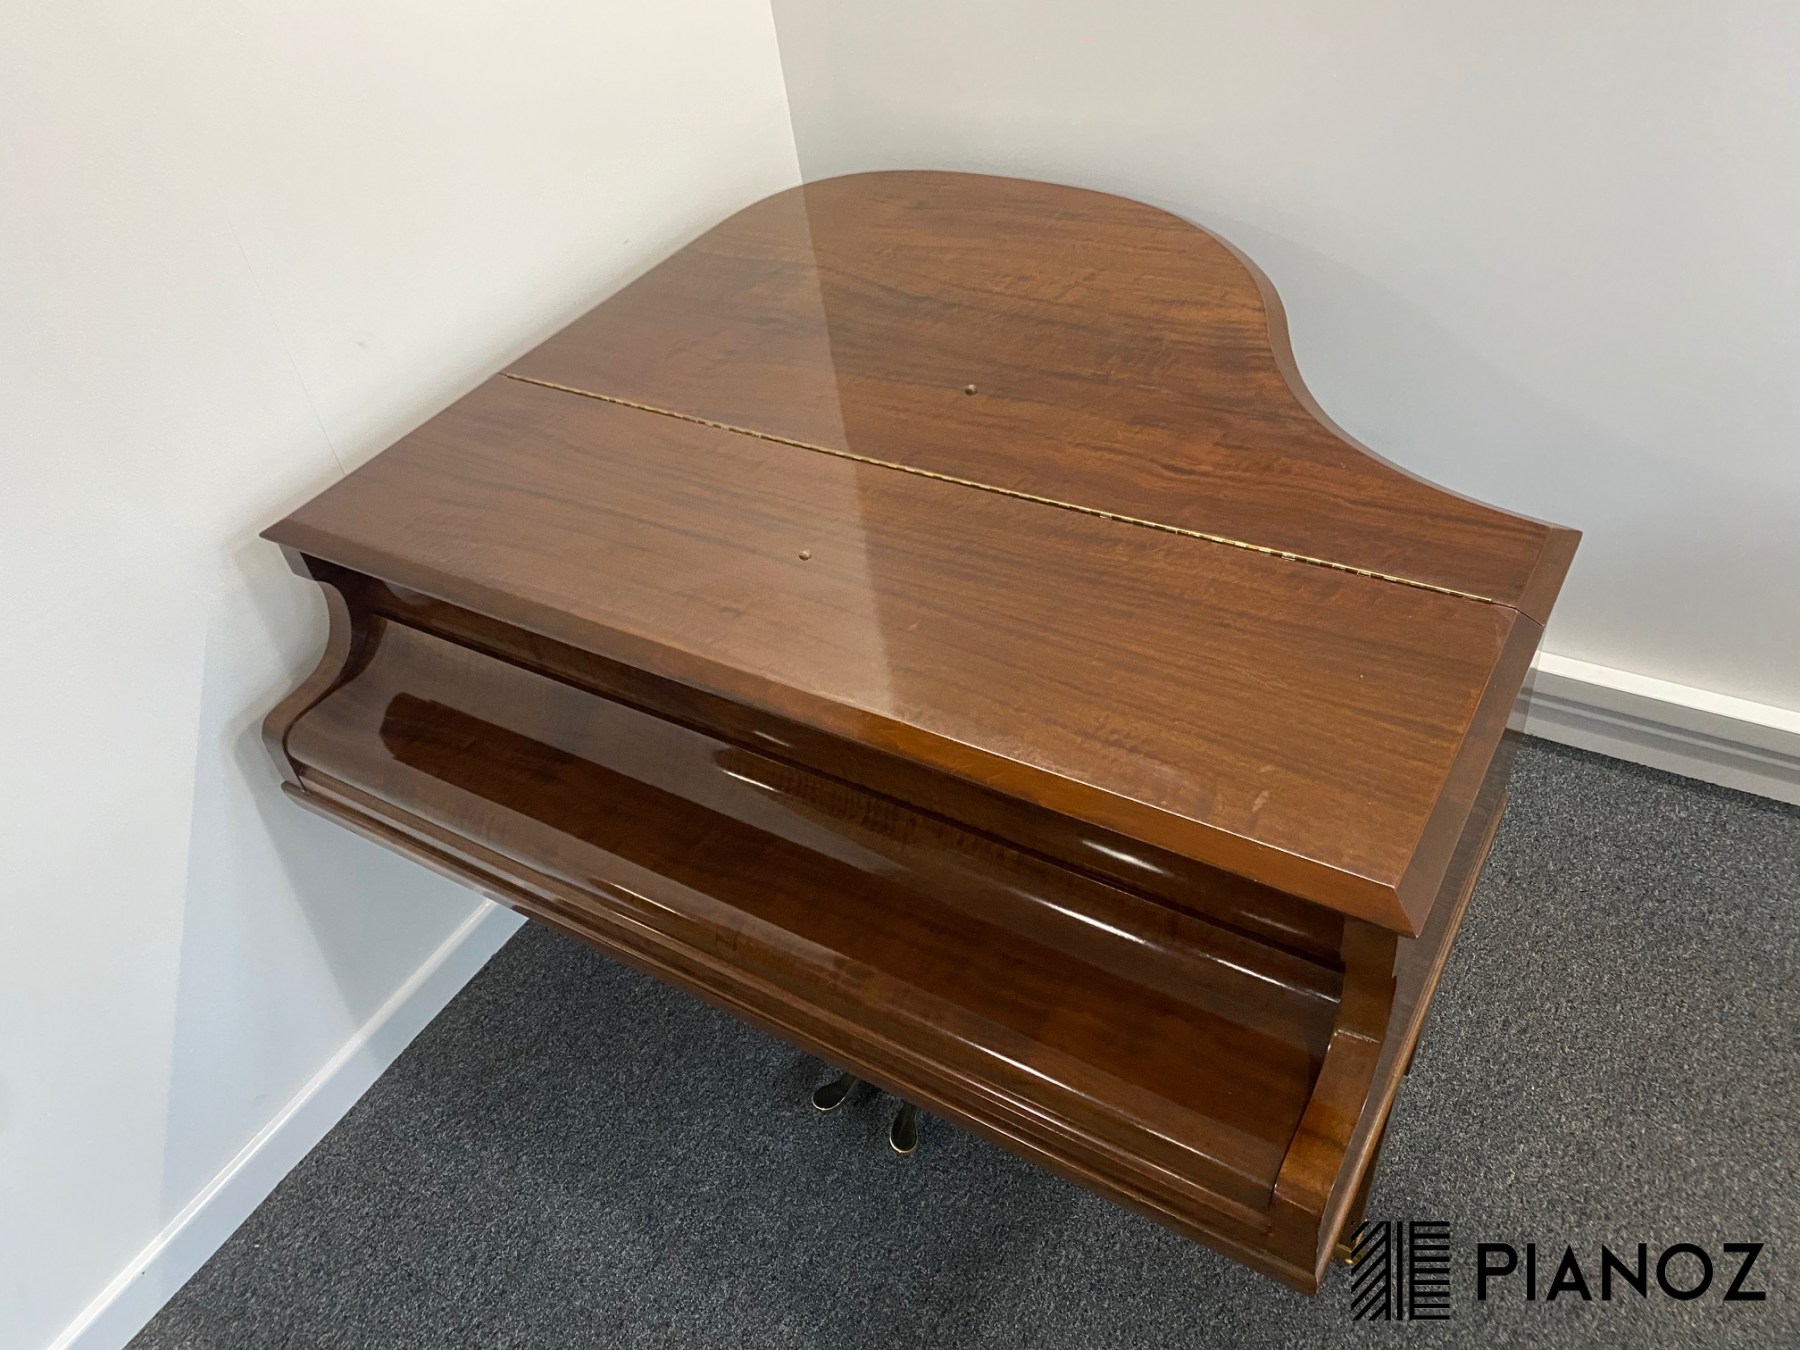 Chappell Fiddleback Mahogany Baby Grand Piano piano for sale in UK